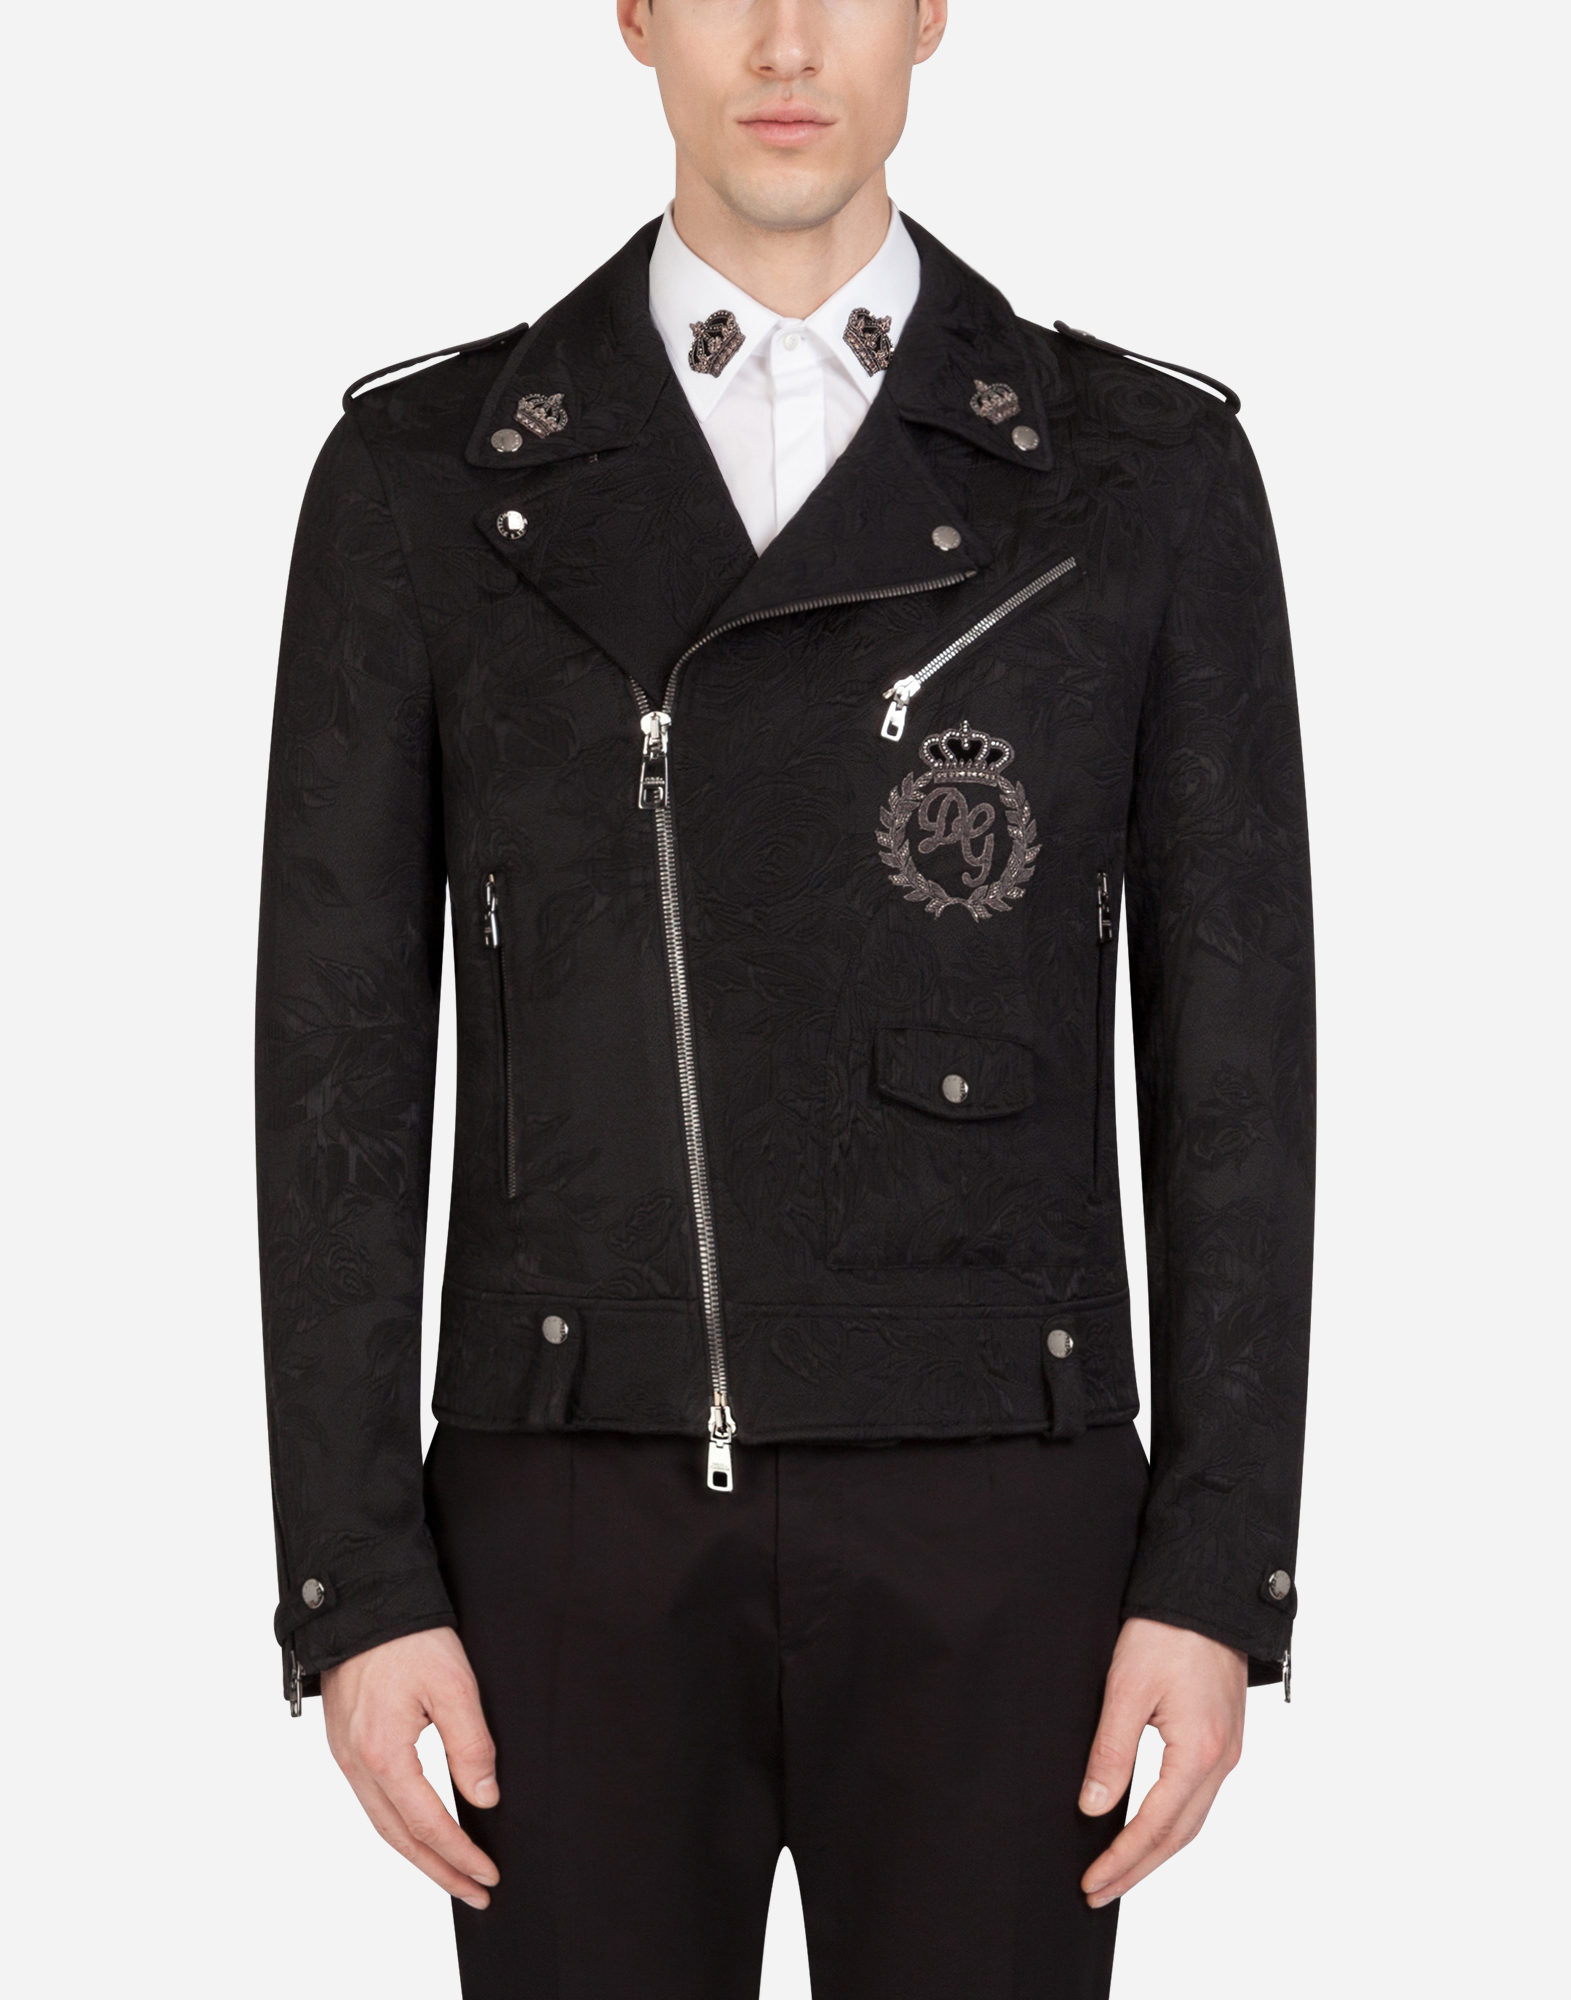 DOLCE & GABBANA JACKET WITH PATCH